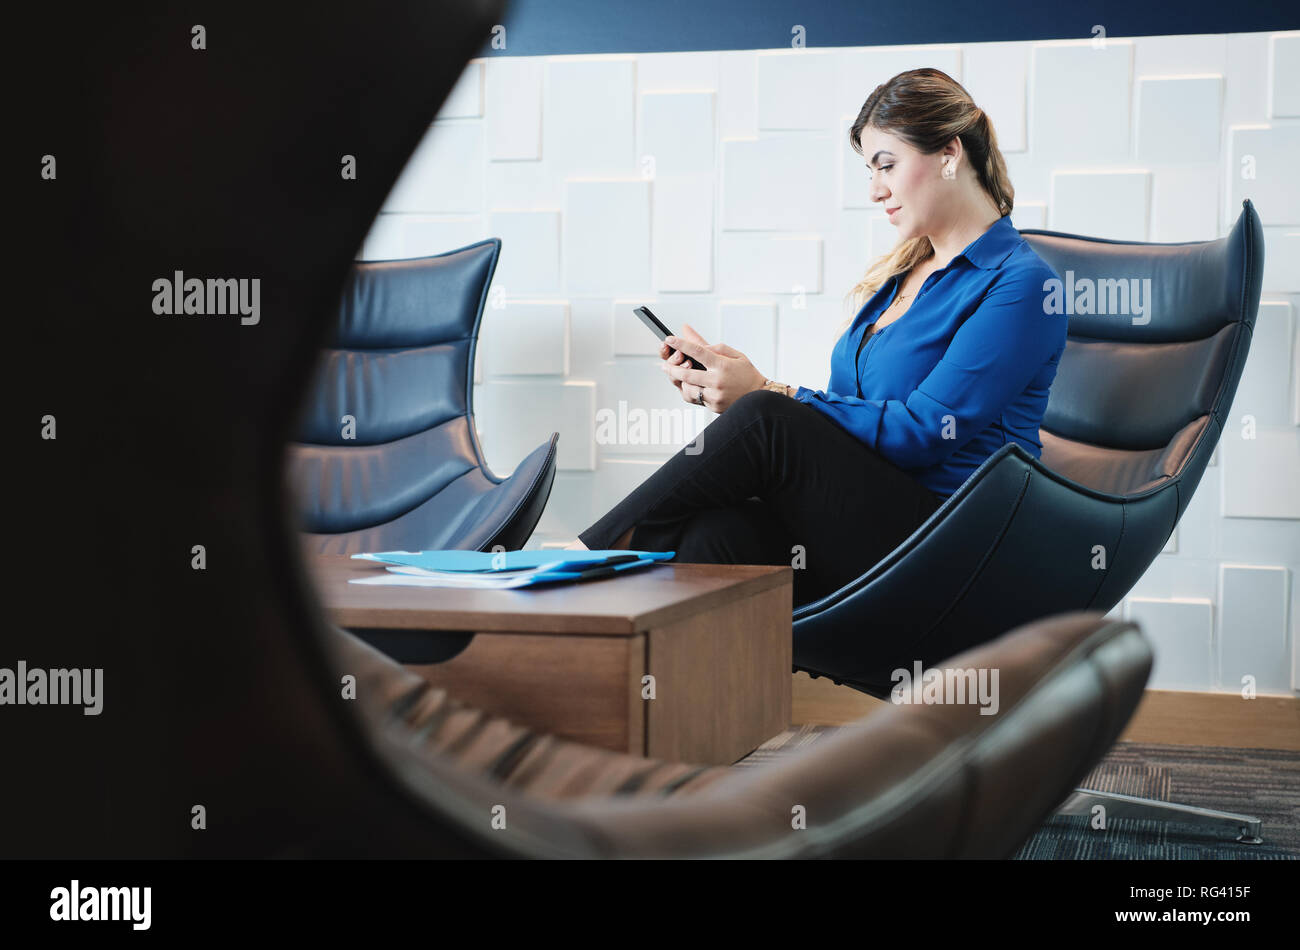 Serious Business Woman With Smartphone Sitting In Office Waiting Room Stock Photo